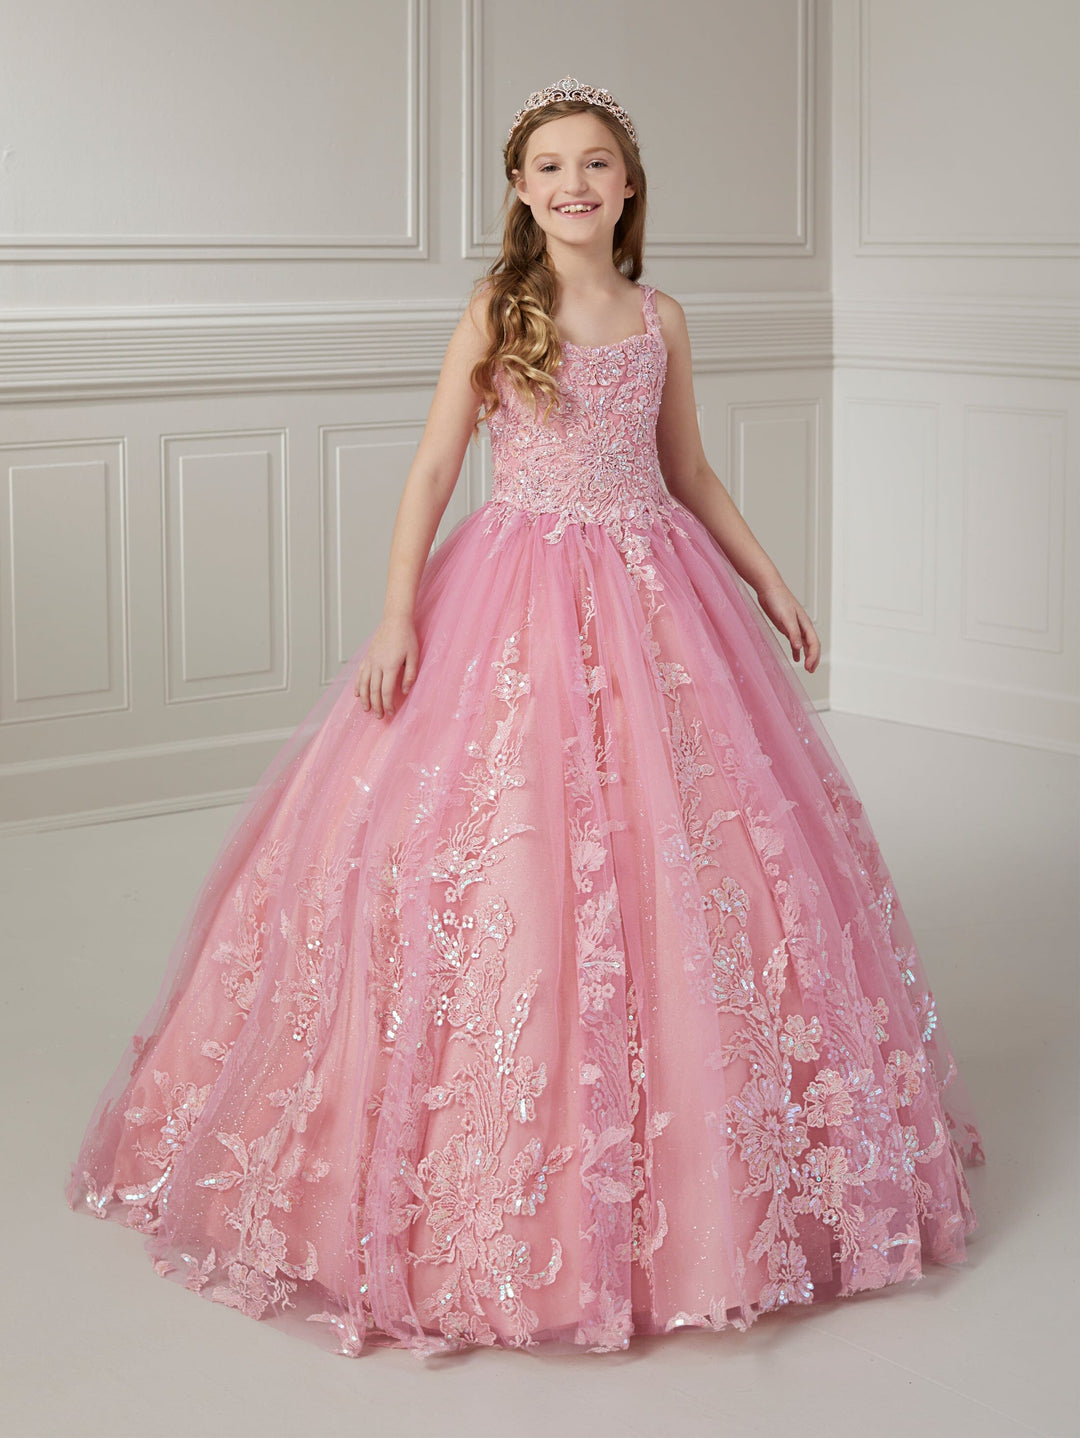 Girls Floral Applique Tulle Gown by Tiffany Princess 13720